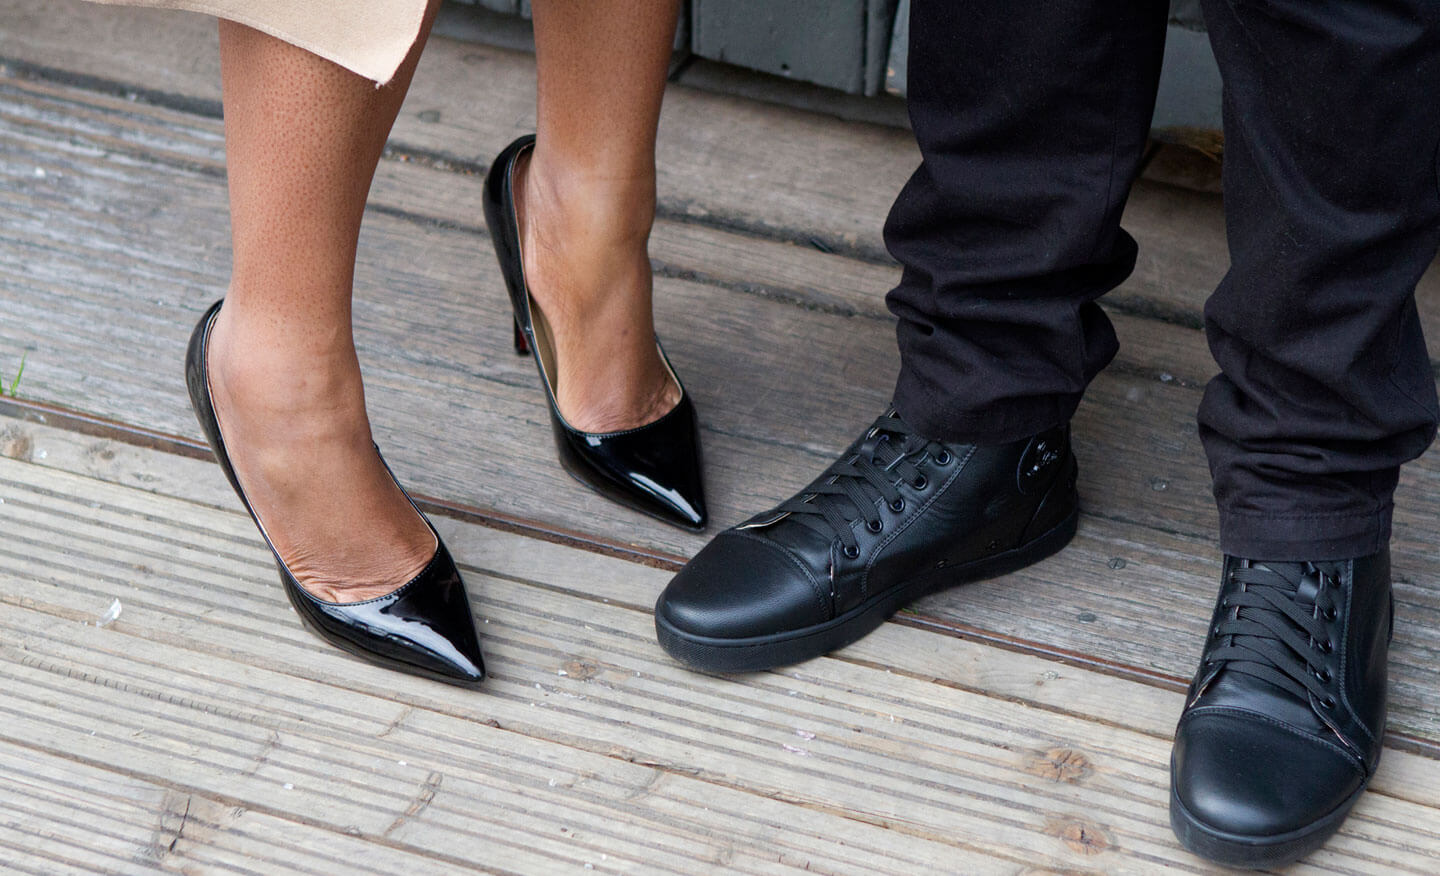 Shoes Allison and Naomi engagement shoot copyright Hazel Buckley Photography via The Gay Wedding Guide 3 4